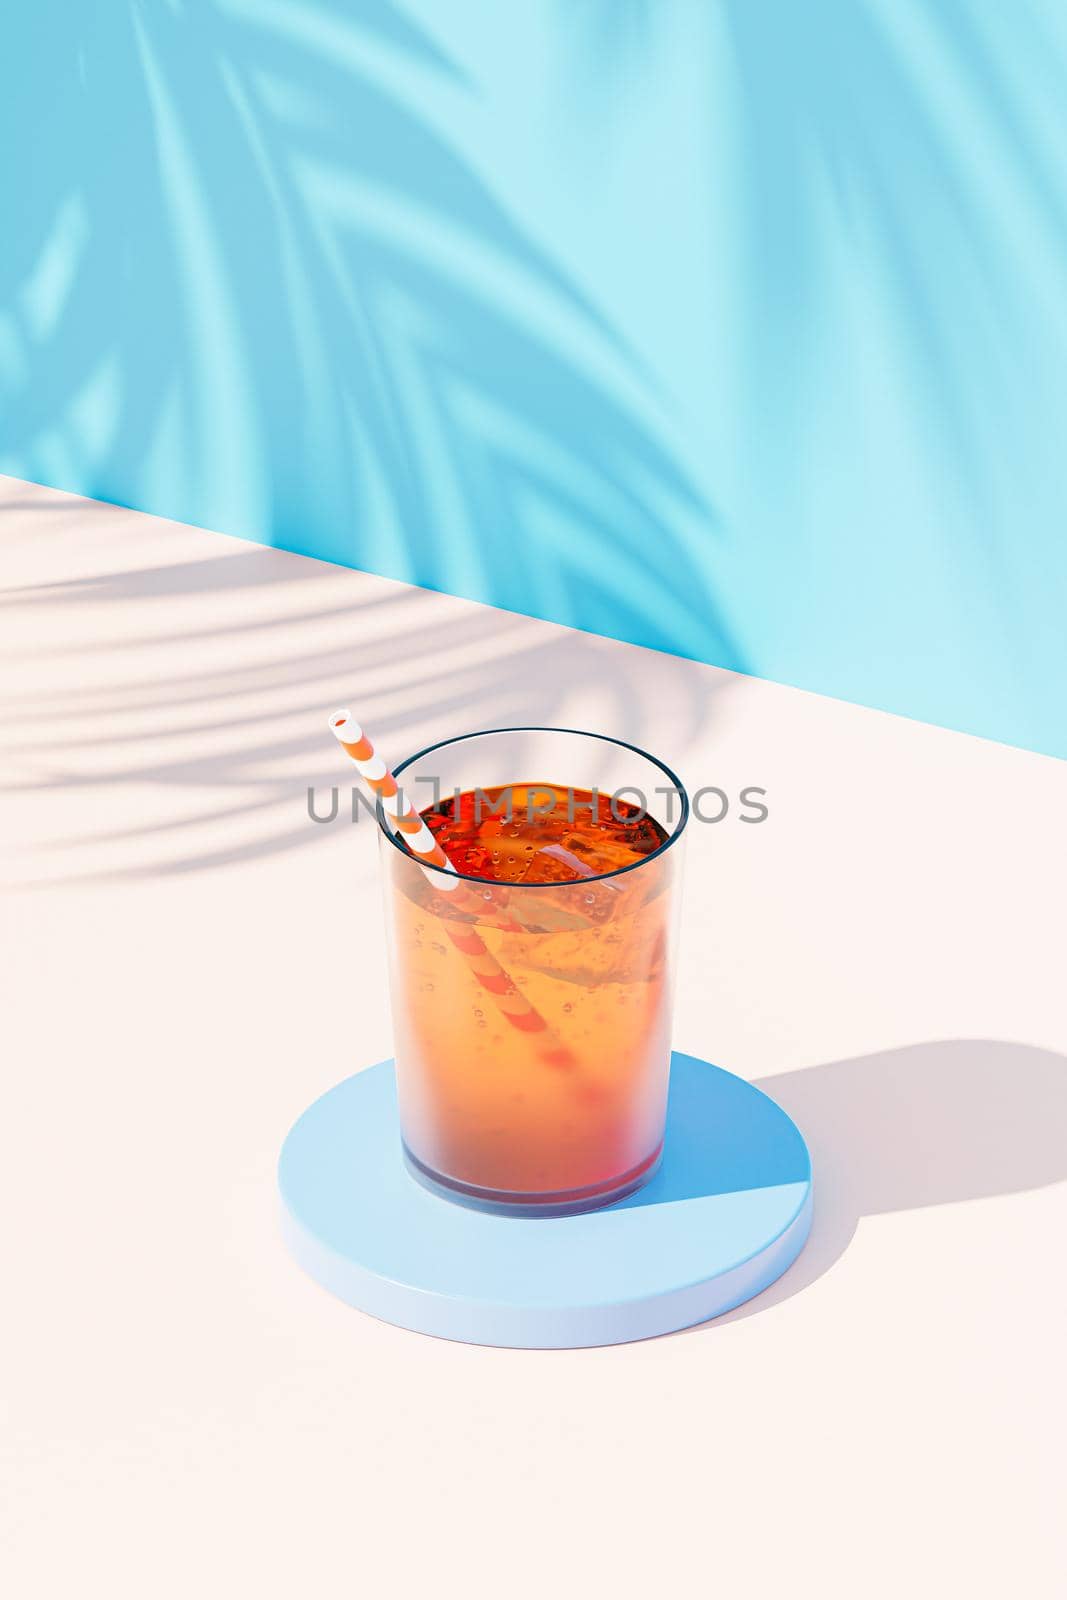 Cocktail drink in glass with ice and straw on blue background with tropical leaf shadows, 3d render by Frostroomhead